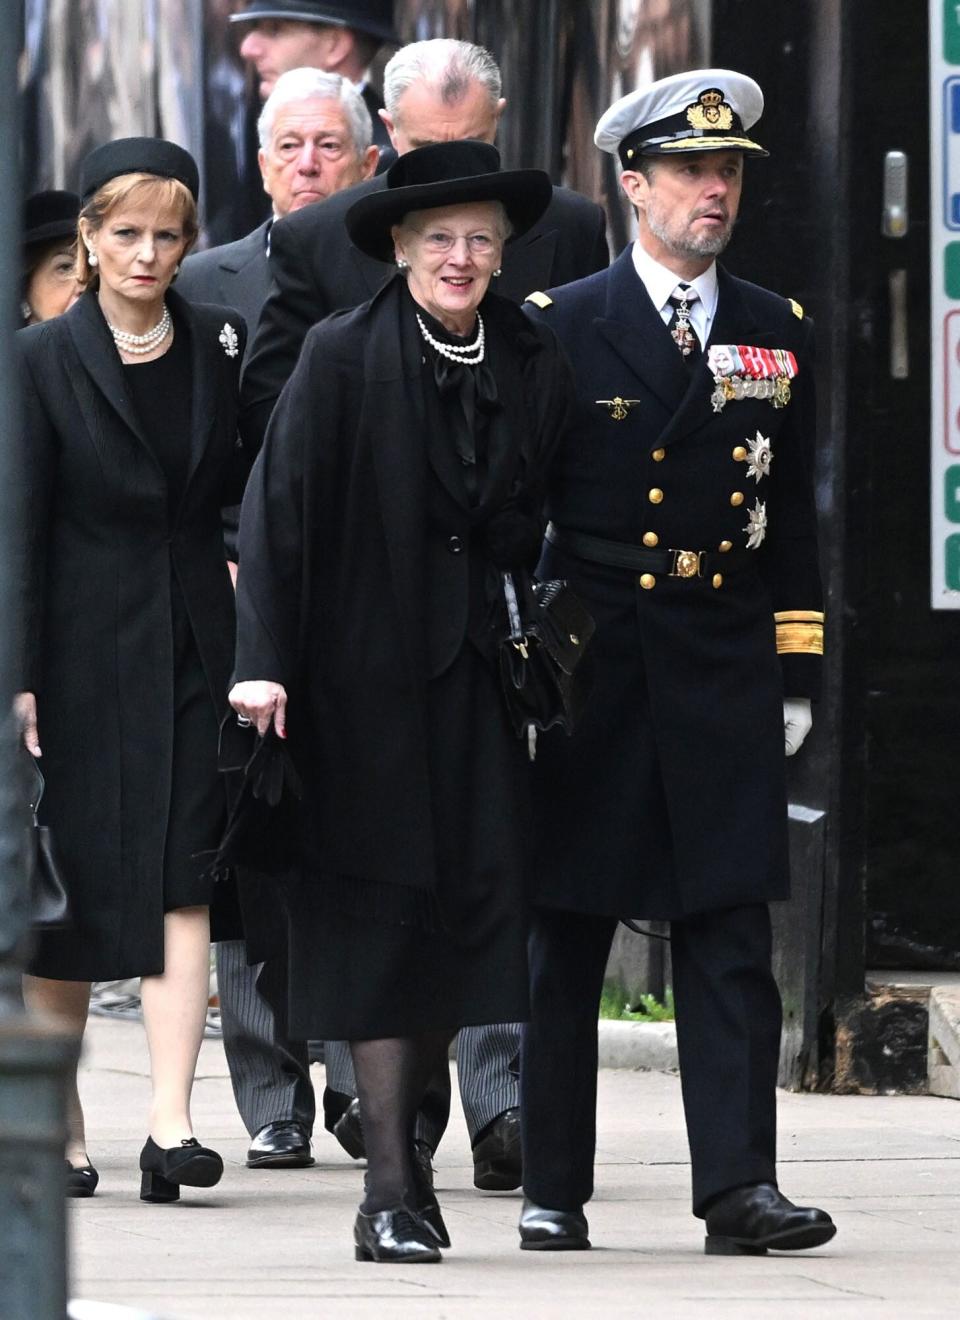 LONDON, ENGLAND - SEPTEMBER 19: Margrethe II of Denmark and Frederik, Crown Prince of Denmark arrive for the State Funeral of Queen Elizabeth II at Westminster Abbey on September 19, 2022 in London, England. Elizabeth Alexandra Mary Windsor was born in Bruton Street, Mayfair, London on 21 April 1926. She married Prince Philip in 1947 and ascended the throne of the United Kingdom and Commonwealth on 6 February 1952 after the death of her Father, King George VI. Queen Elizabeth II died at Balmoral Castle in Scotland on September 8, 2022, and is succeeded by her eldest son, King Charles III. (Photo by Samir Hussein/WireImage)